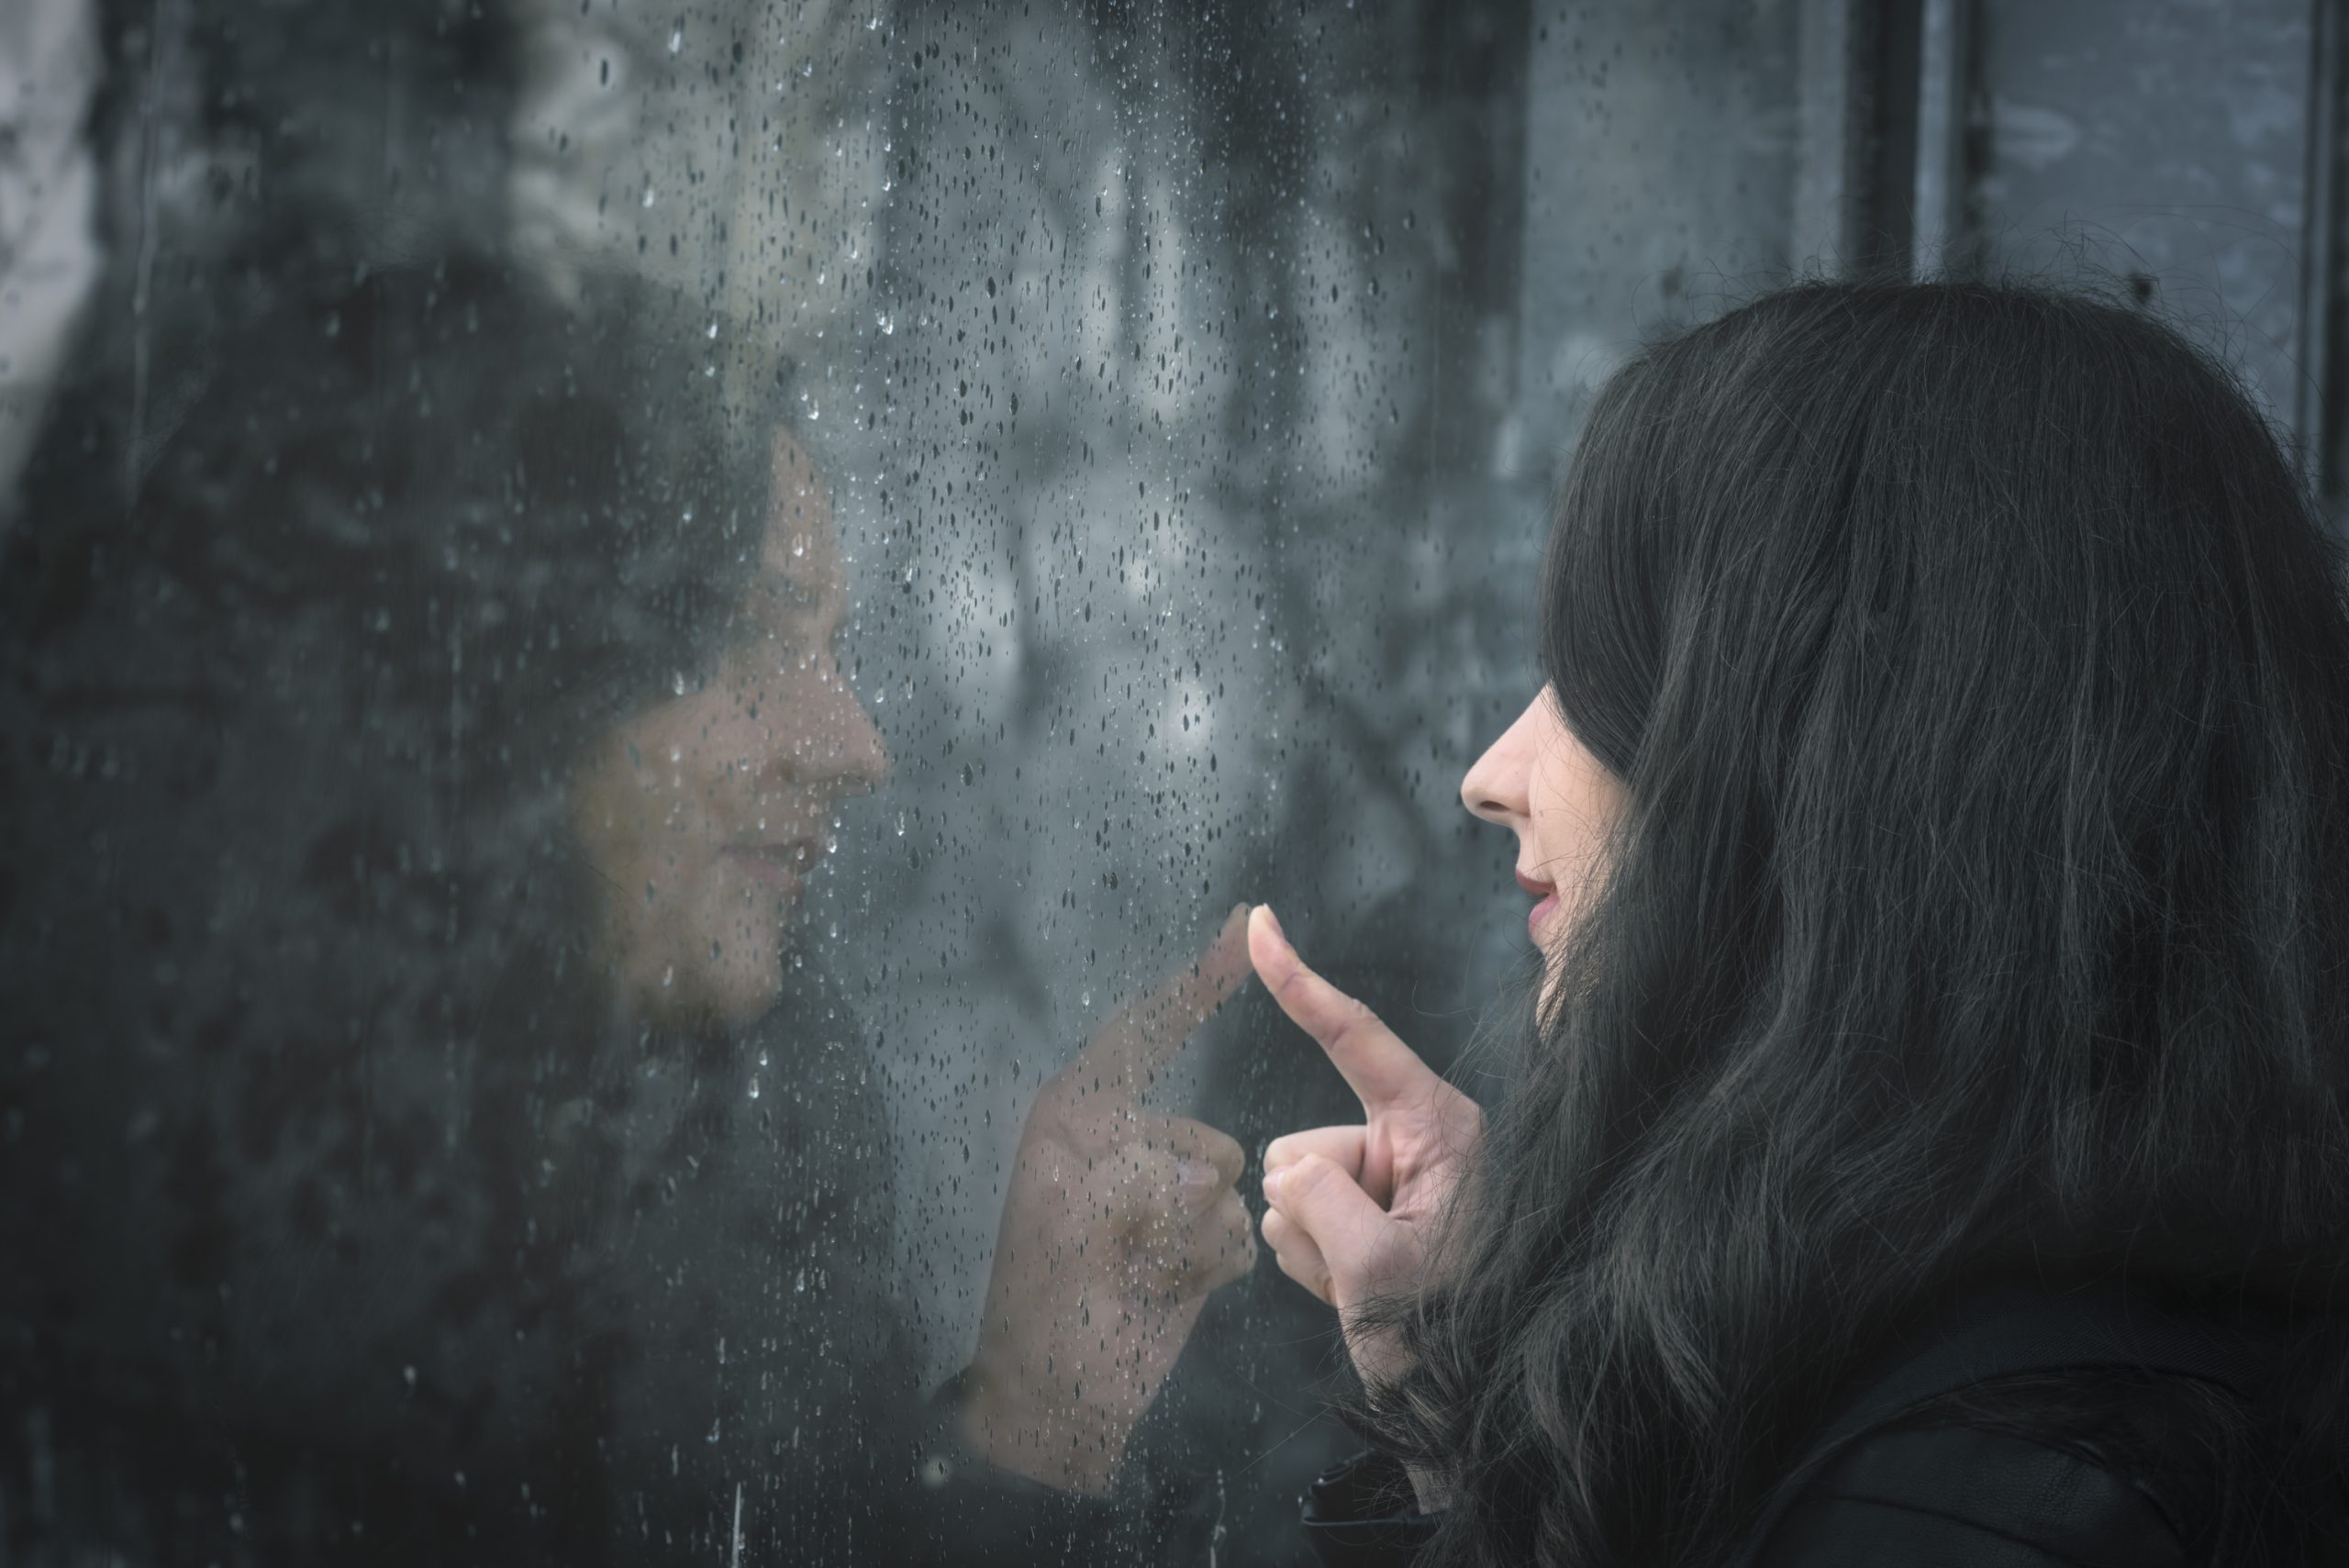 Woman and her reflection on rainy window to illustrate History of Window Tint And Today’s Modern Tinting